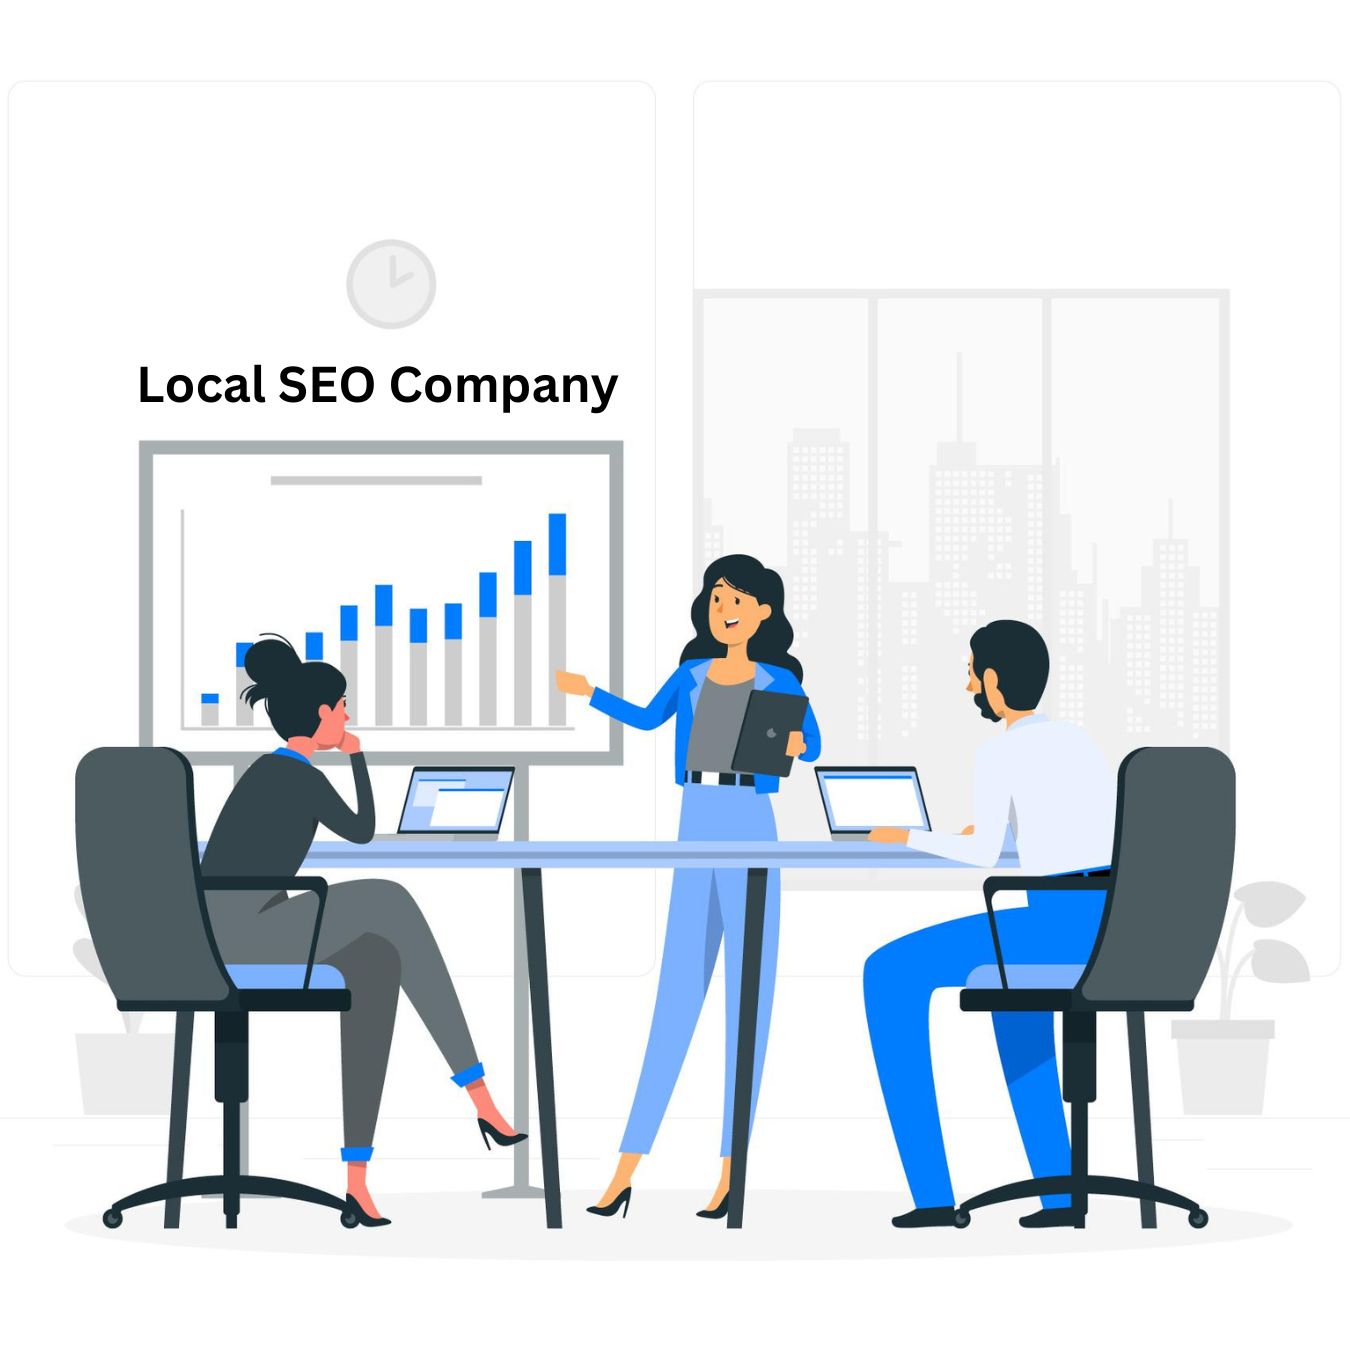 Local SEO Company (also known as “Local SEO Agency”)